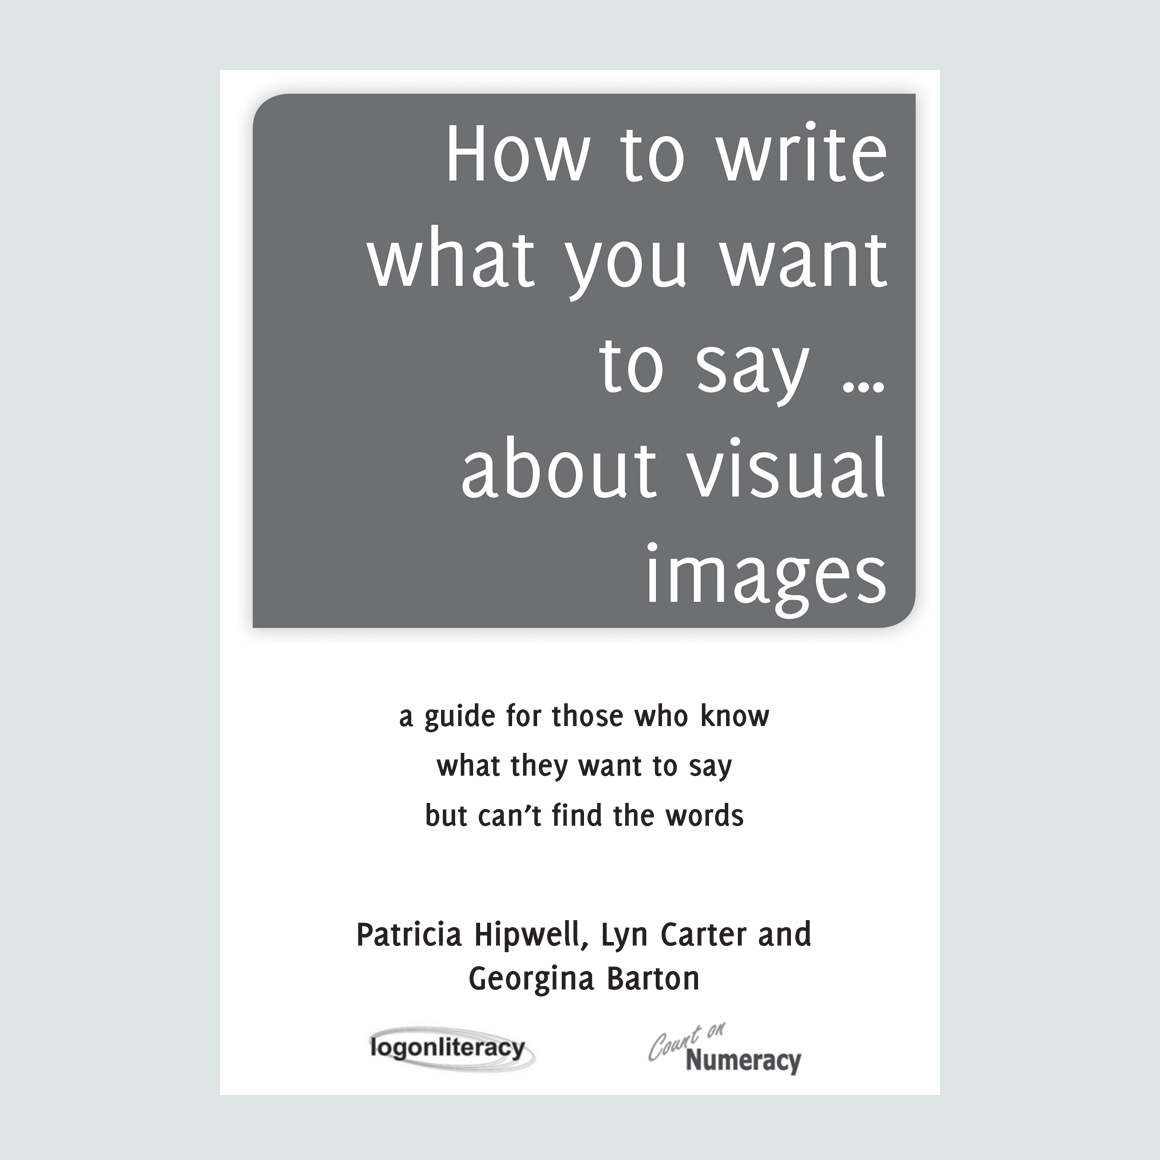 How to write what you want to say... about visual images